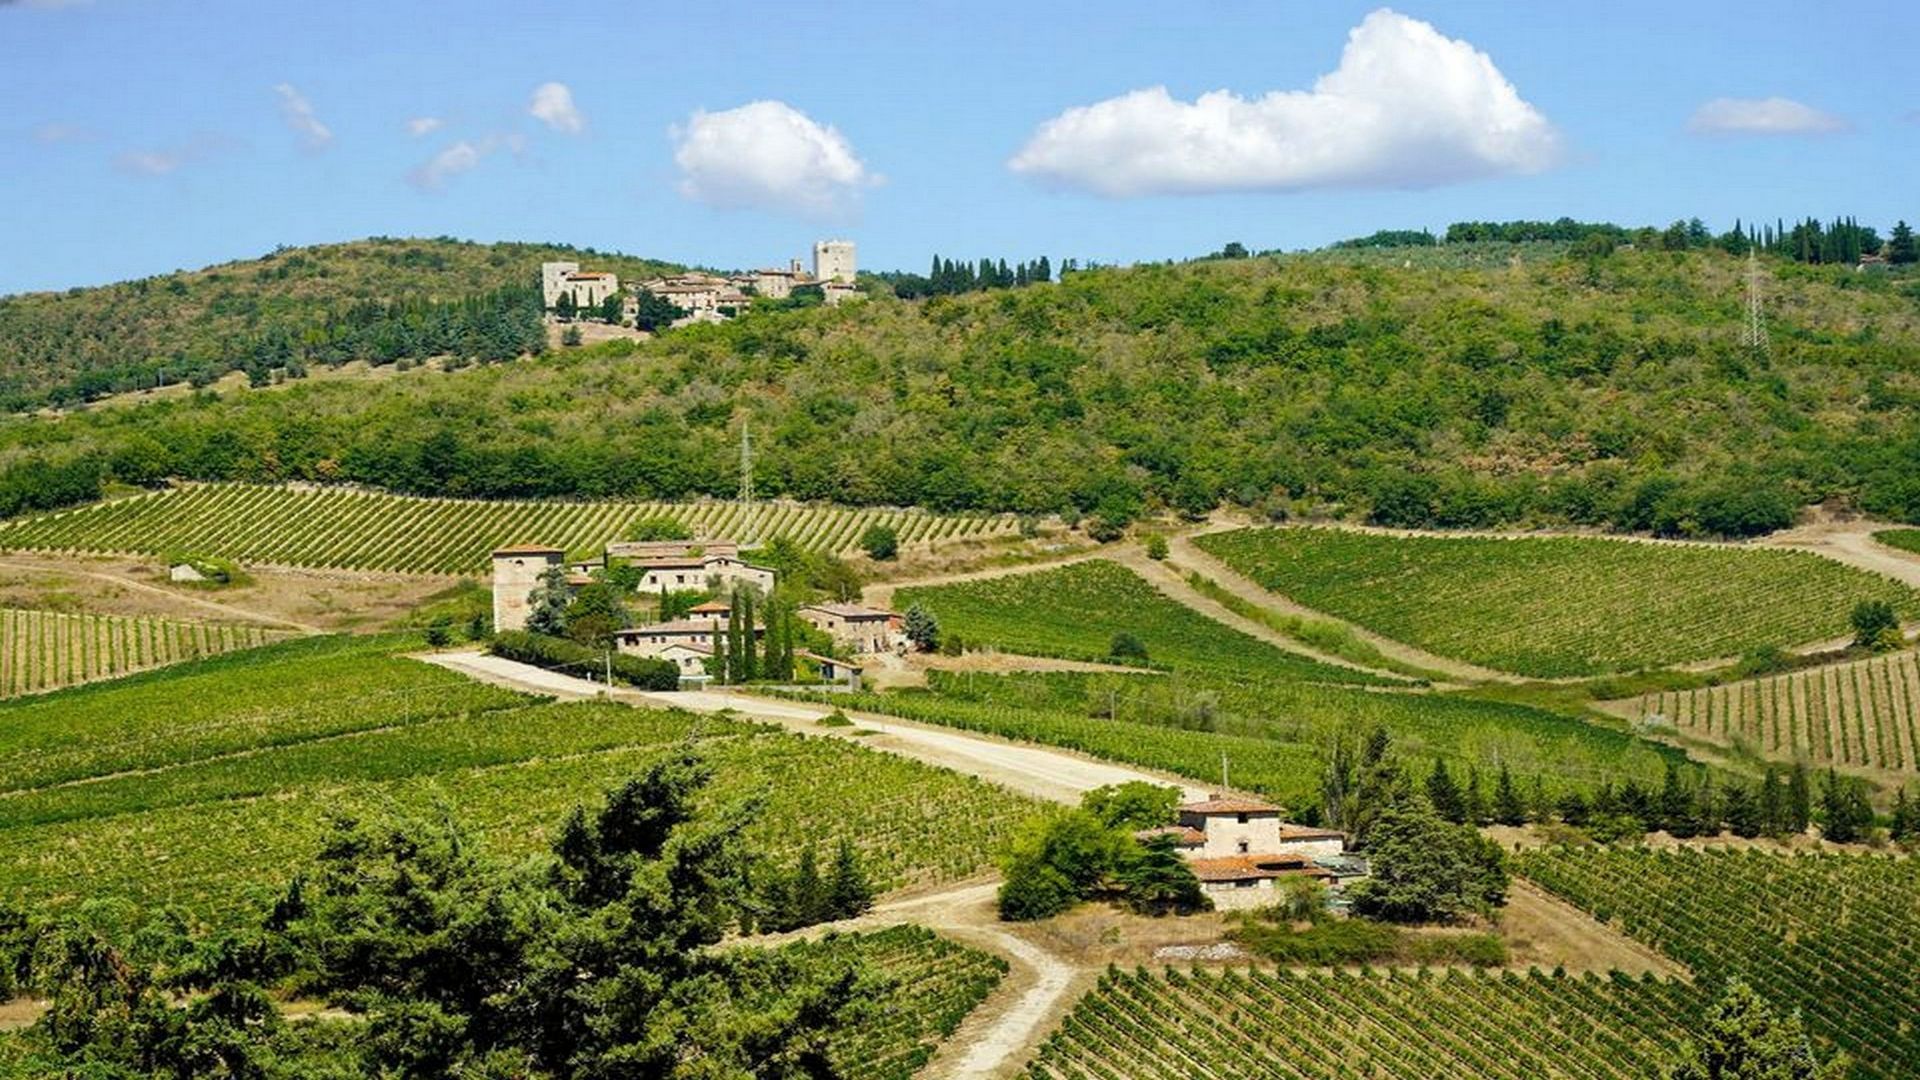 Circular route on country roads and paths, rich in historical and landscape interests in the heart of Chianti